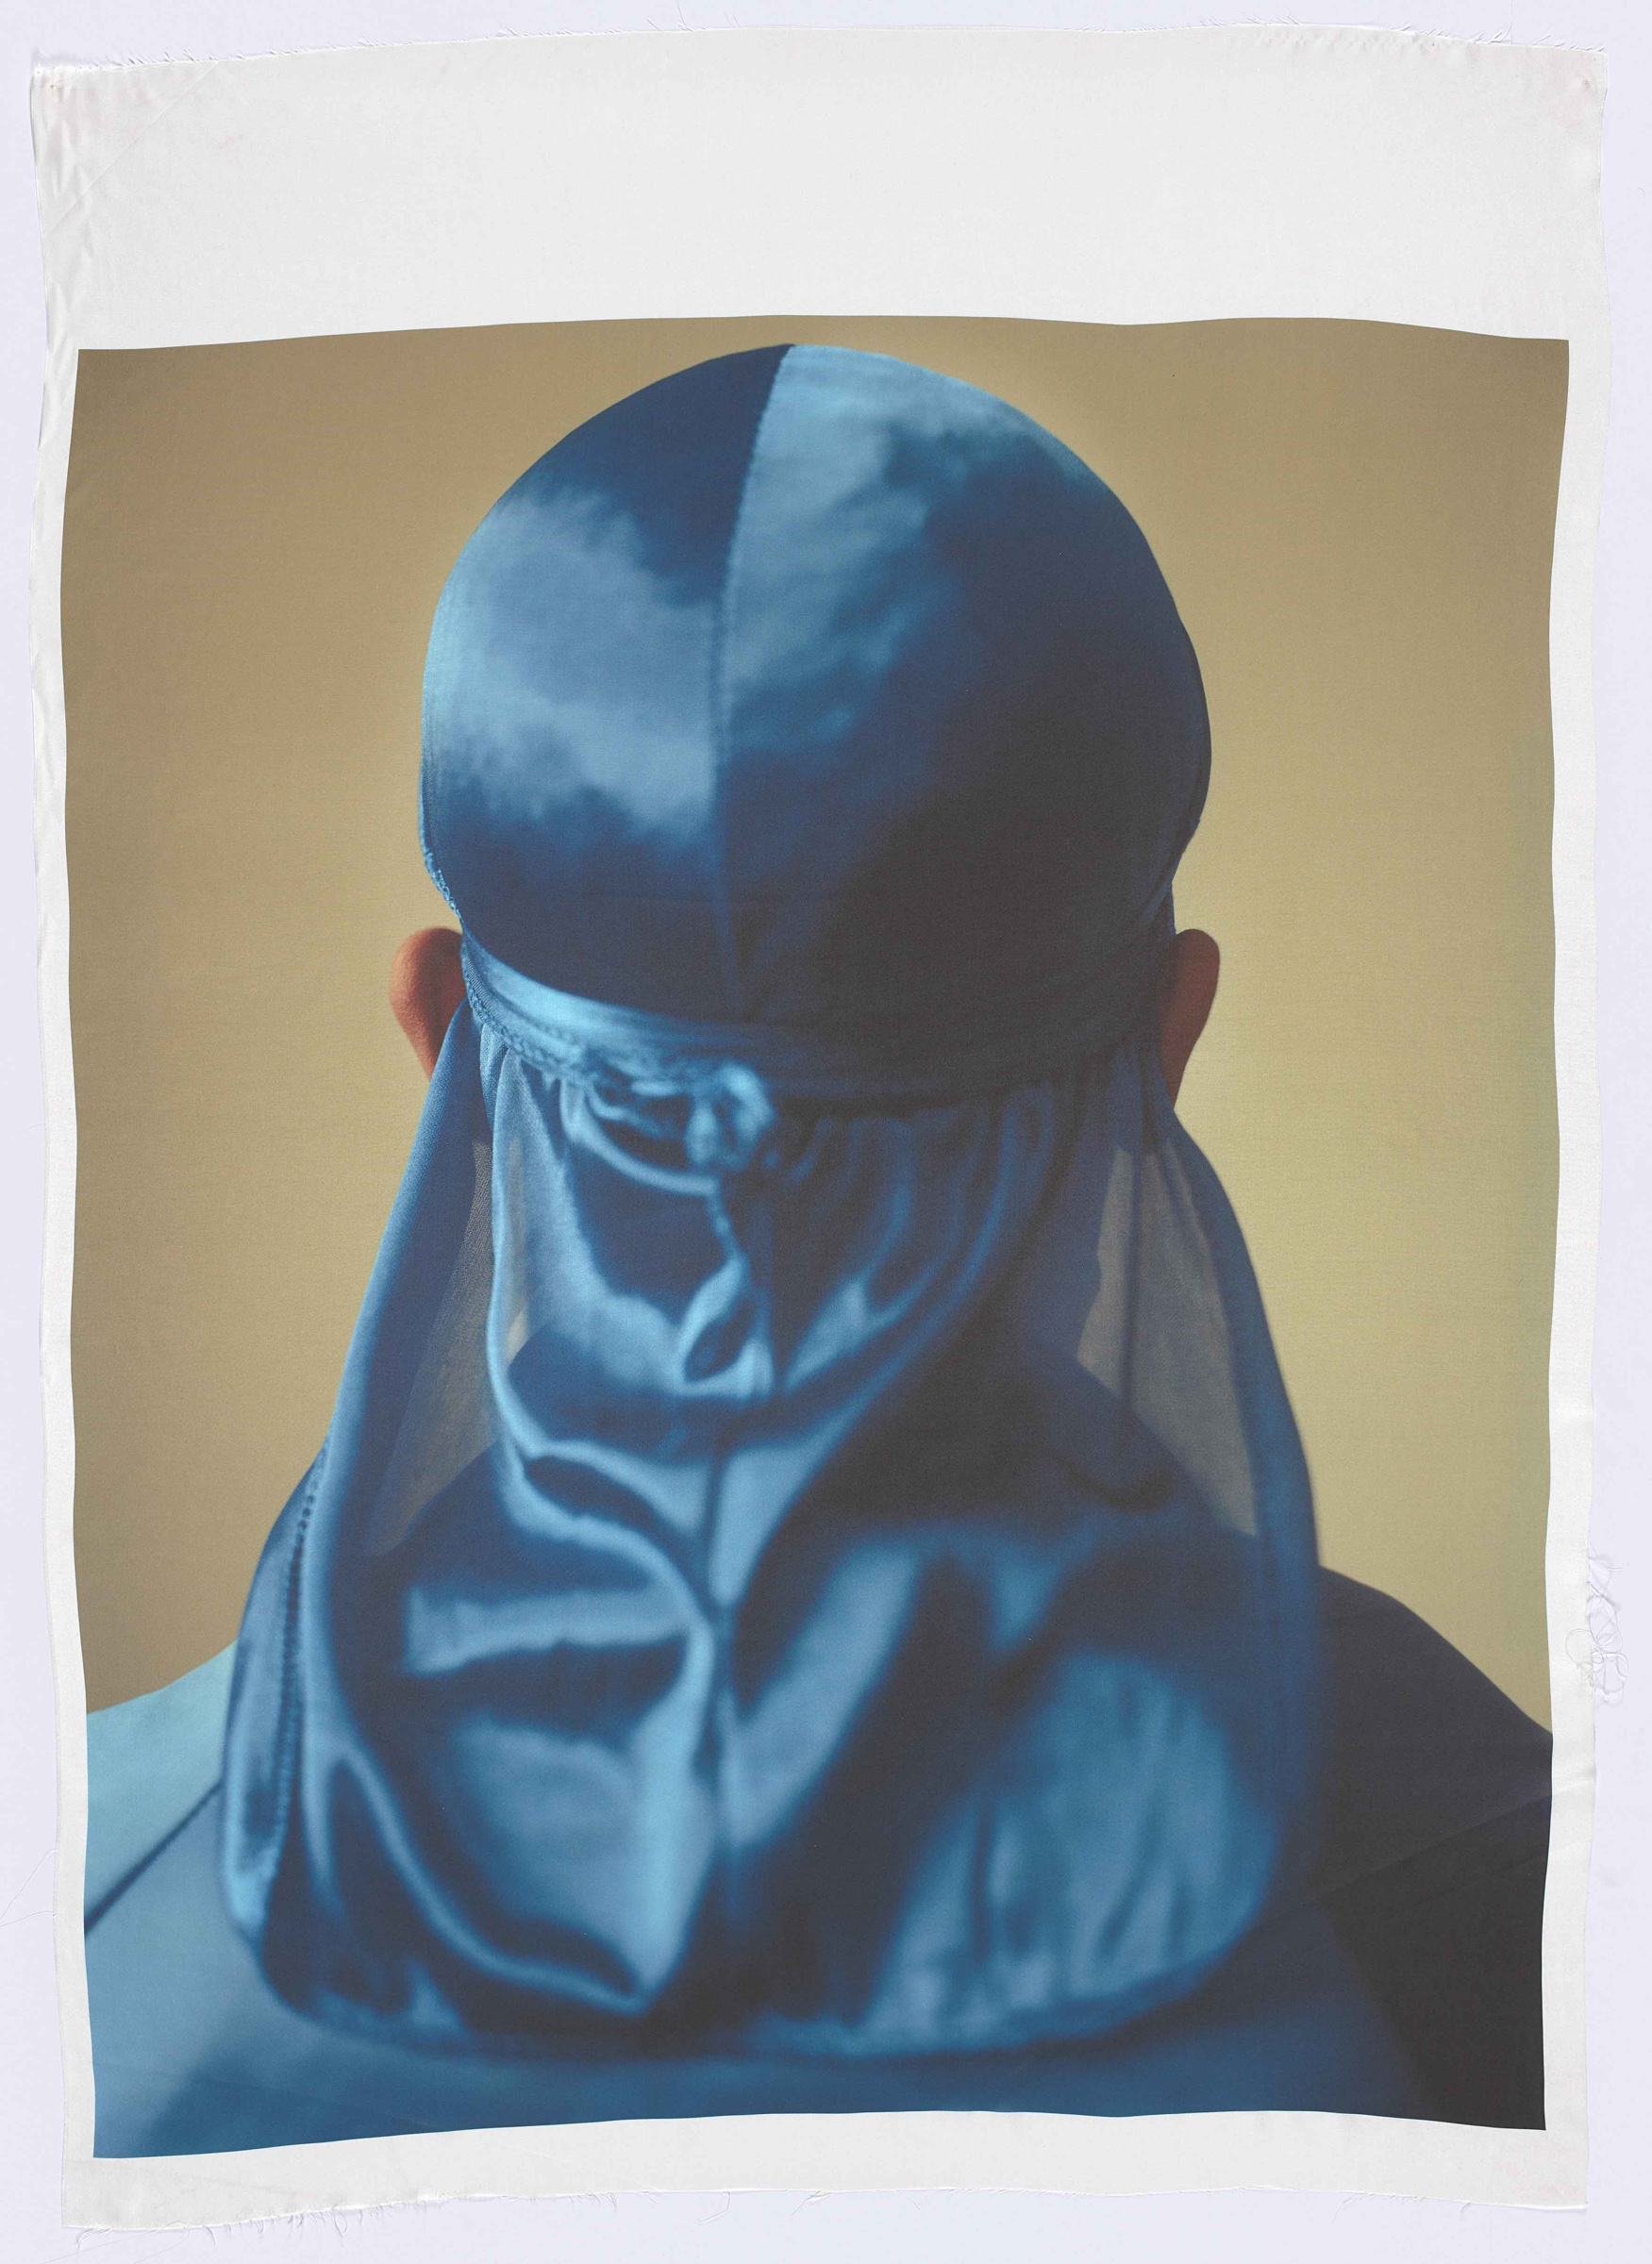 John Edmonds, Untitled (Du-Rag 3), 2017. Archival pigment print on Japanese silk, 150.5 x 107.5 cm. Art Gallery of Ontario, Purchased with the assistance of Art Toronto 2017 Opening Night Preview, 2017. © John Edmonds 2017/42.